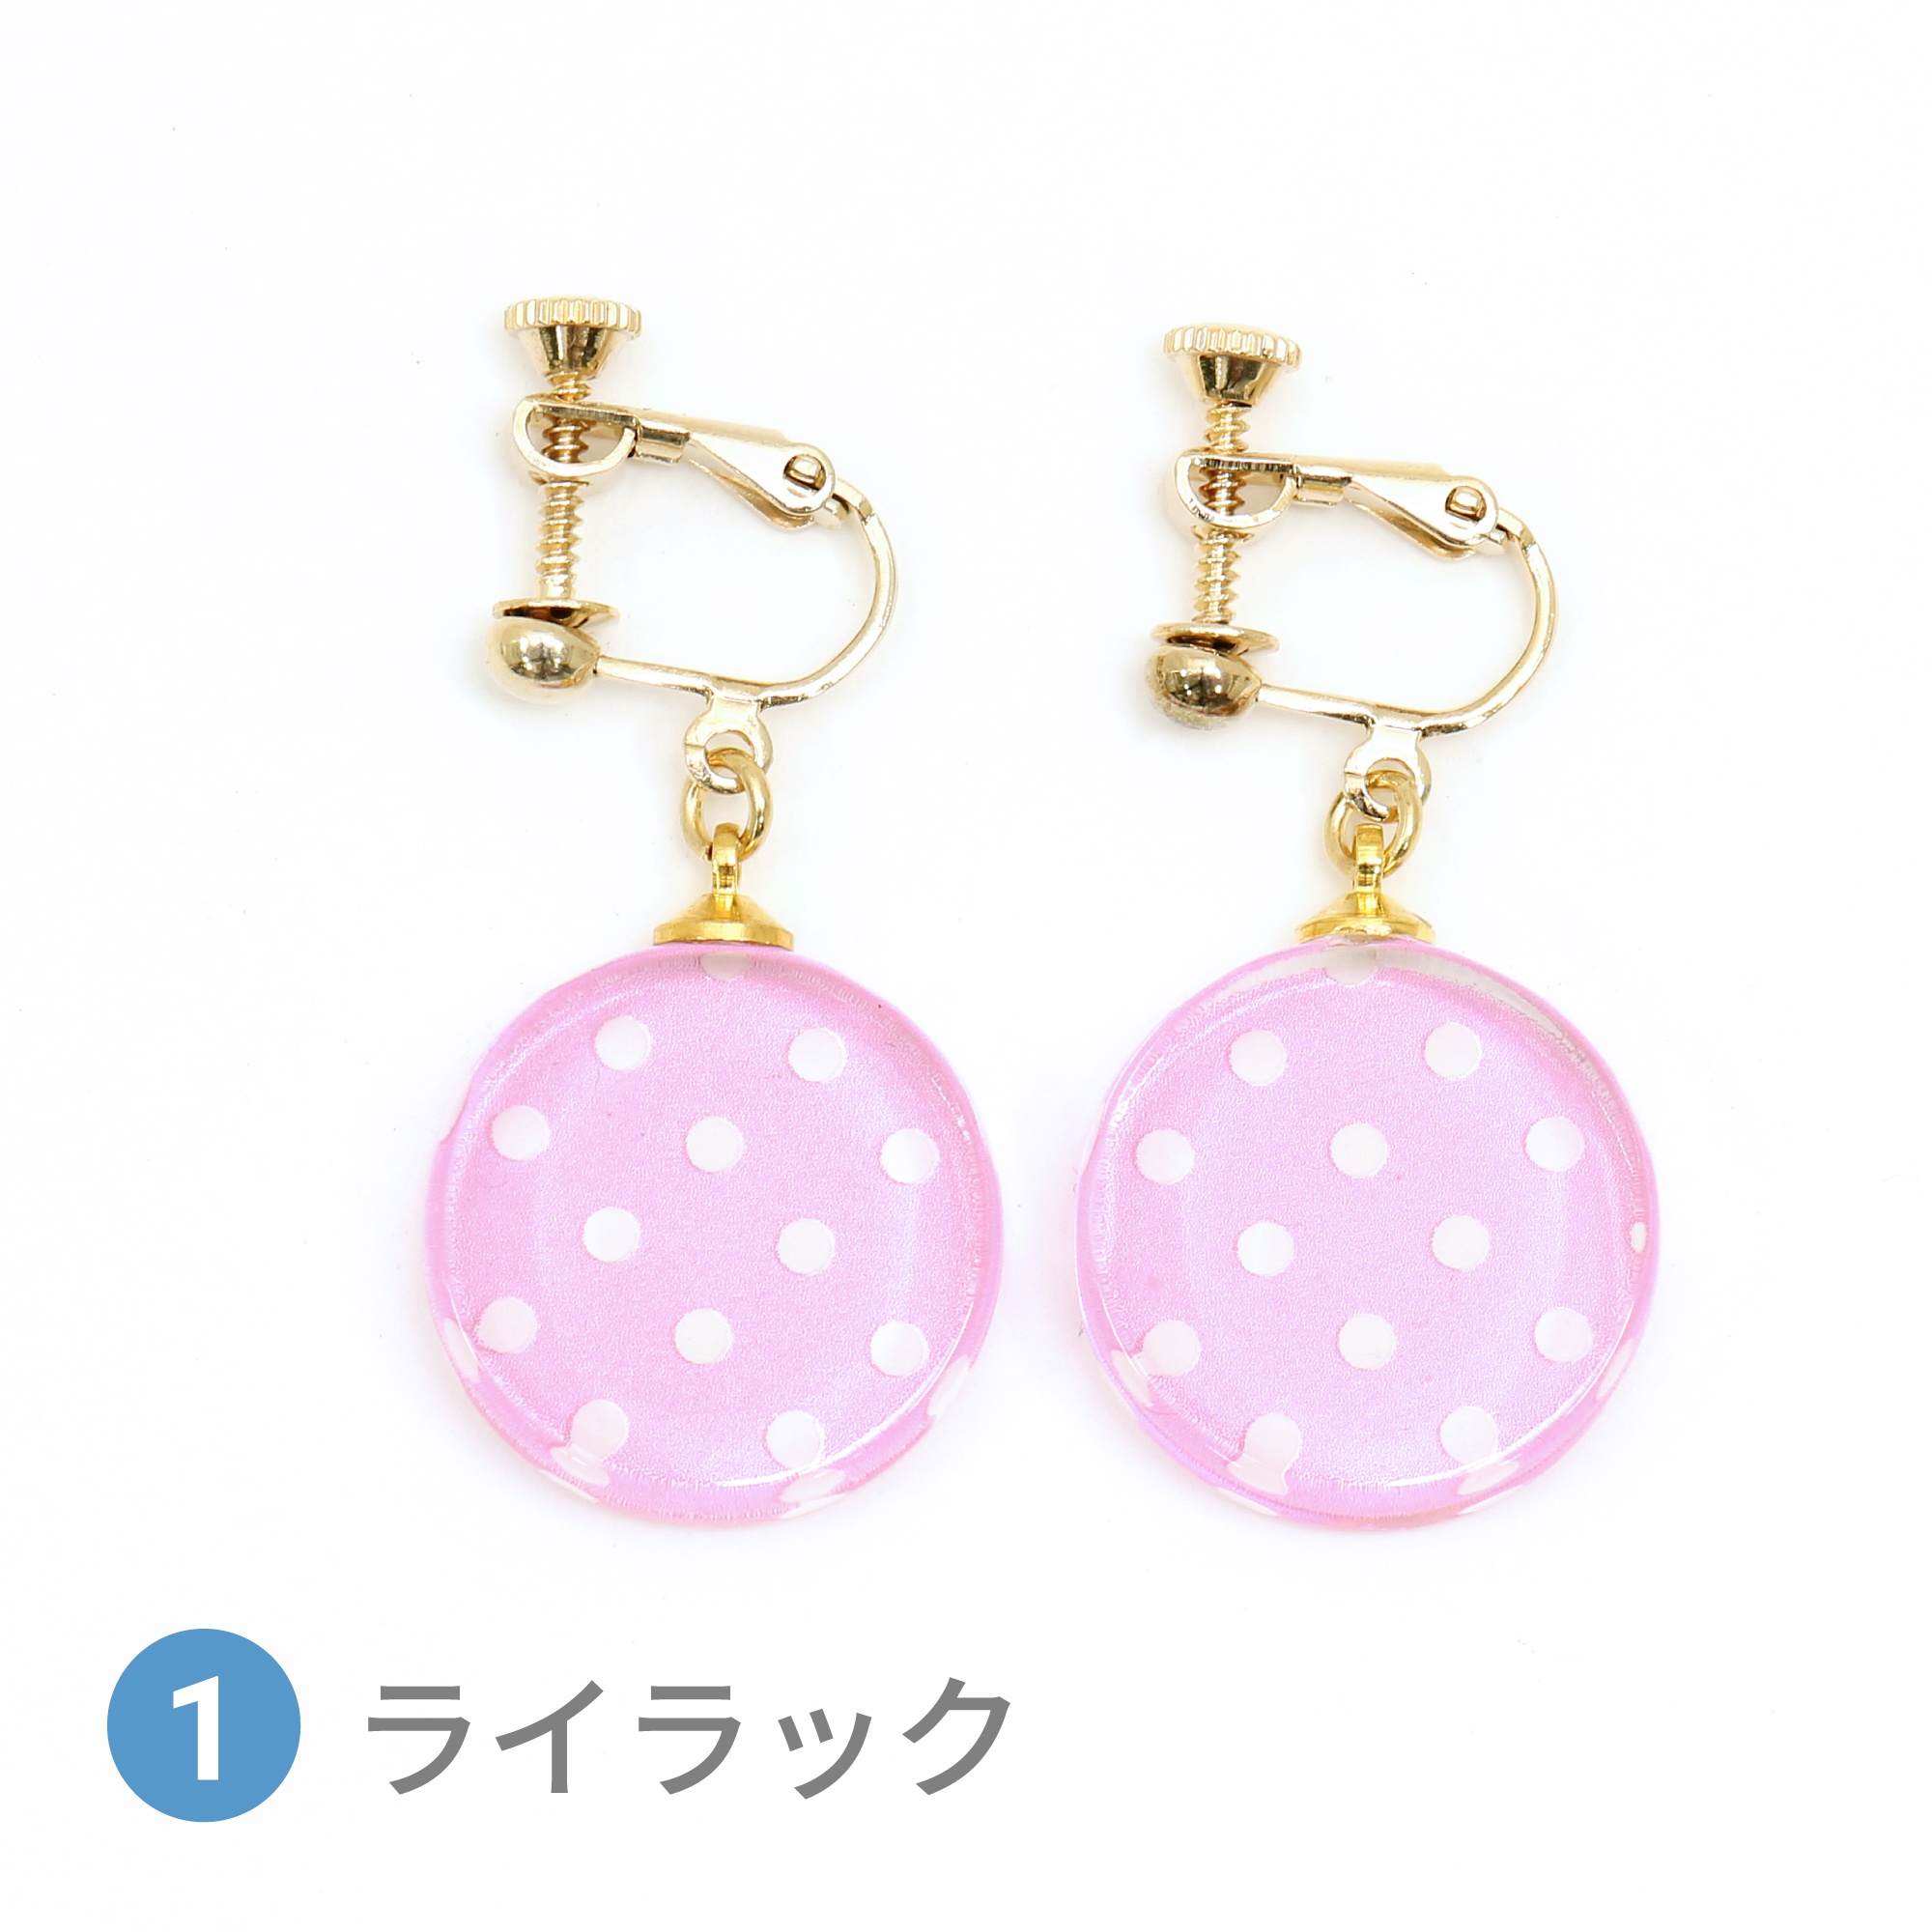 Glass accessories Earring DOT lilac round shape